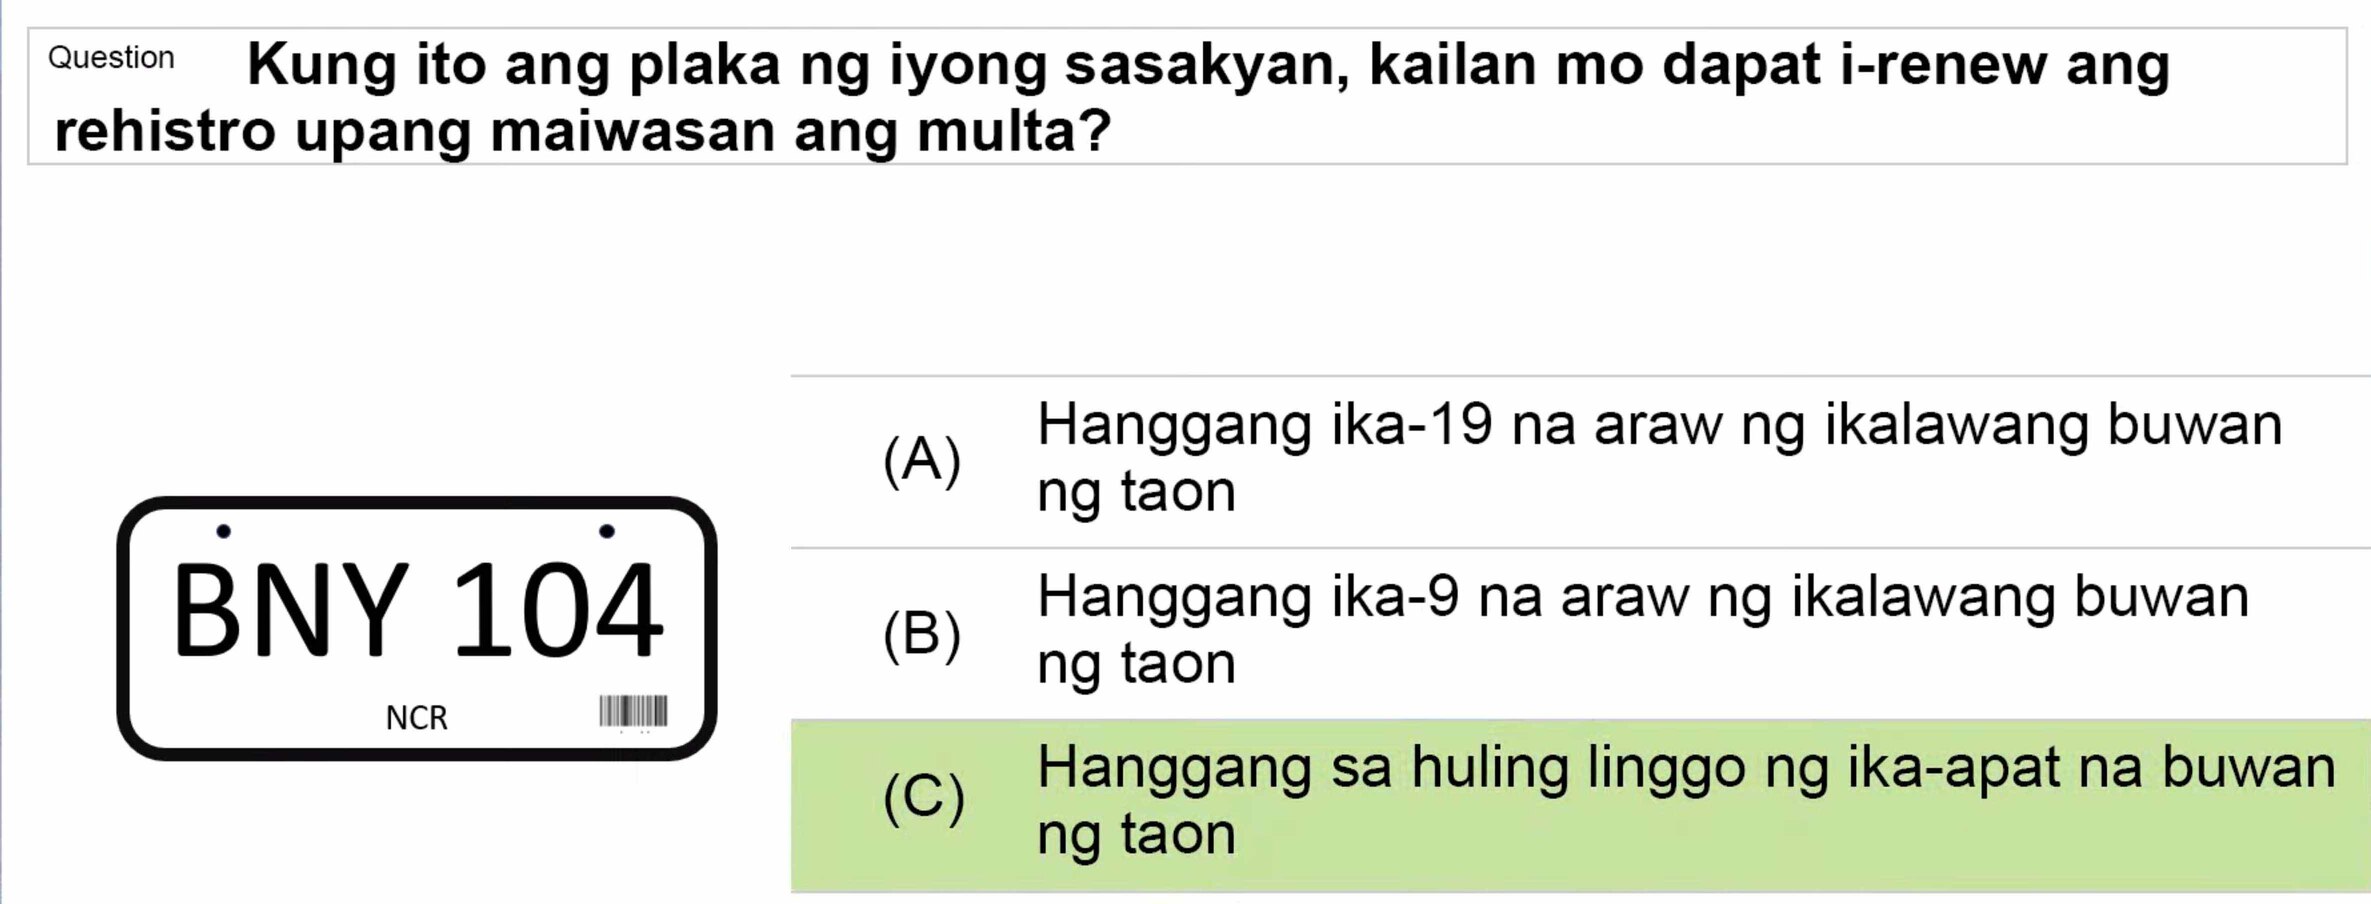 LTO Tagalog non professional exam reviewer motorcycle 3 (39)